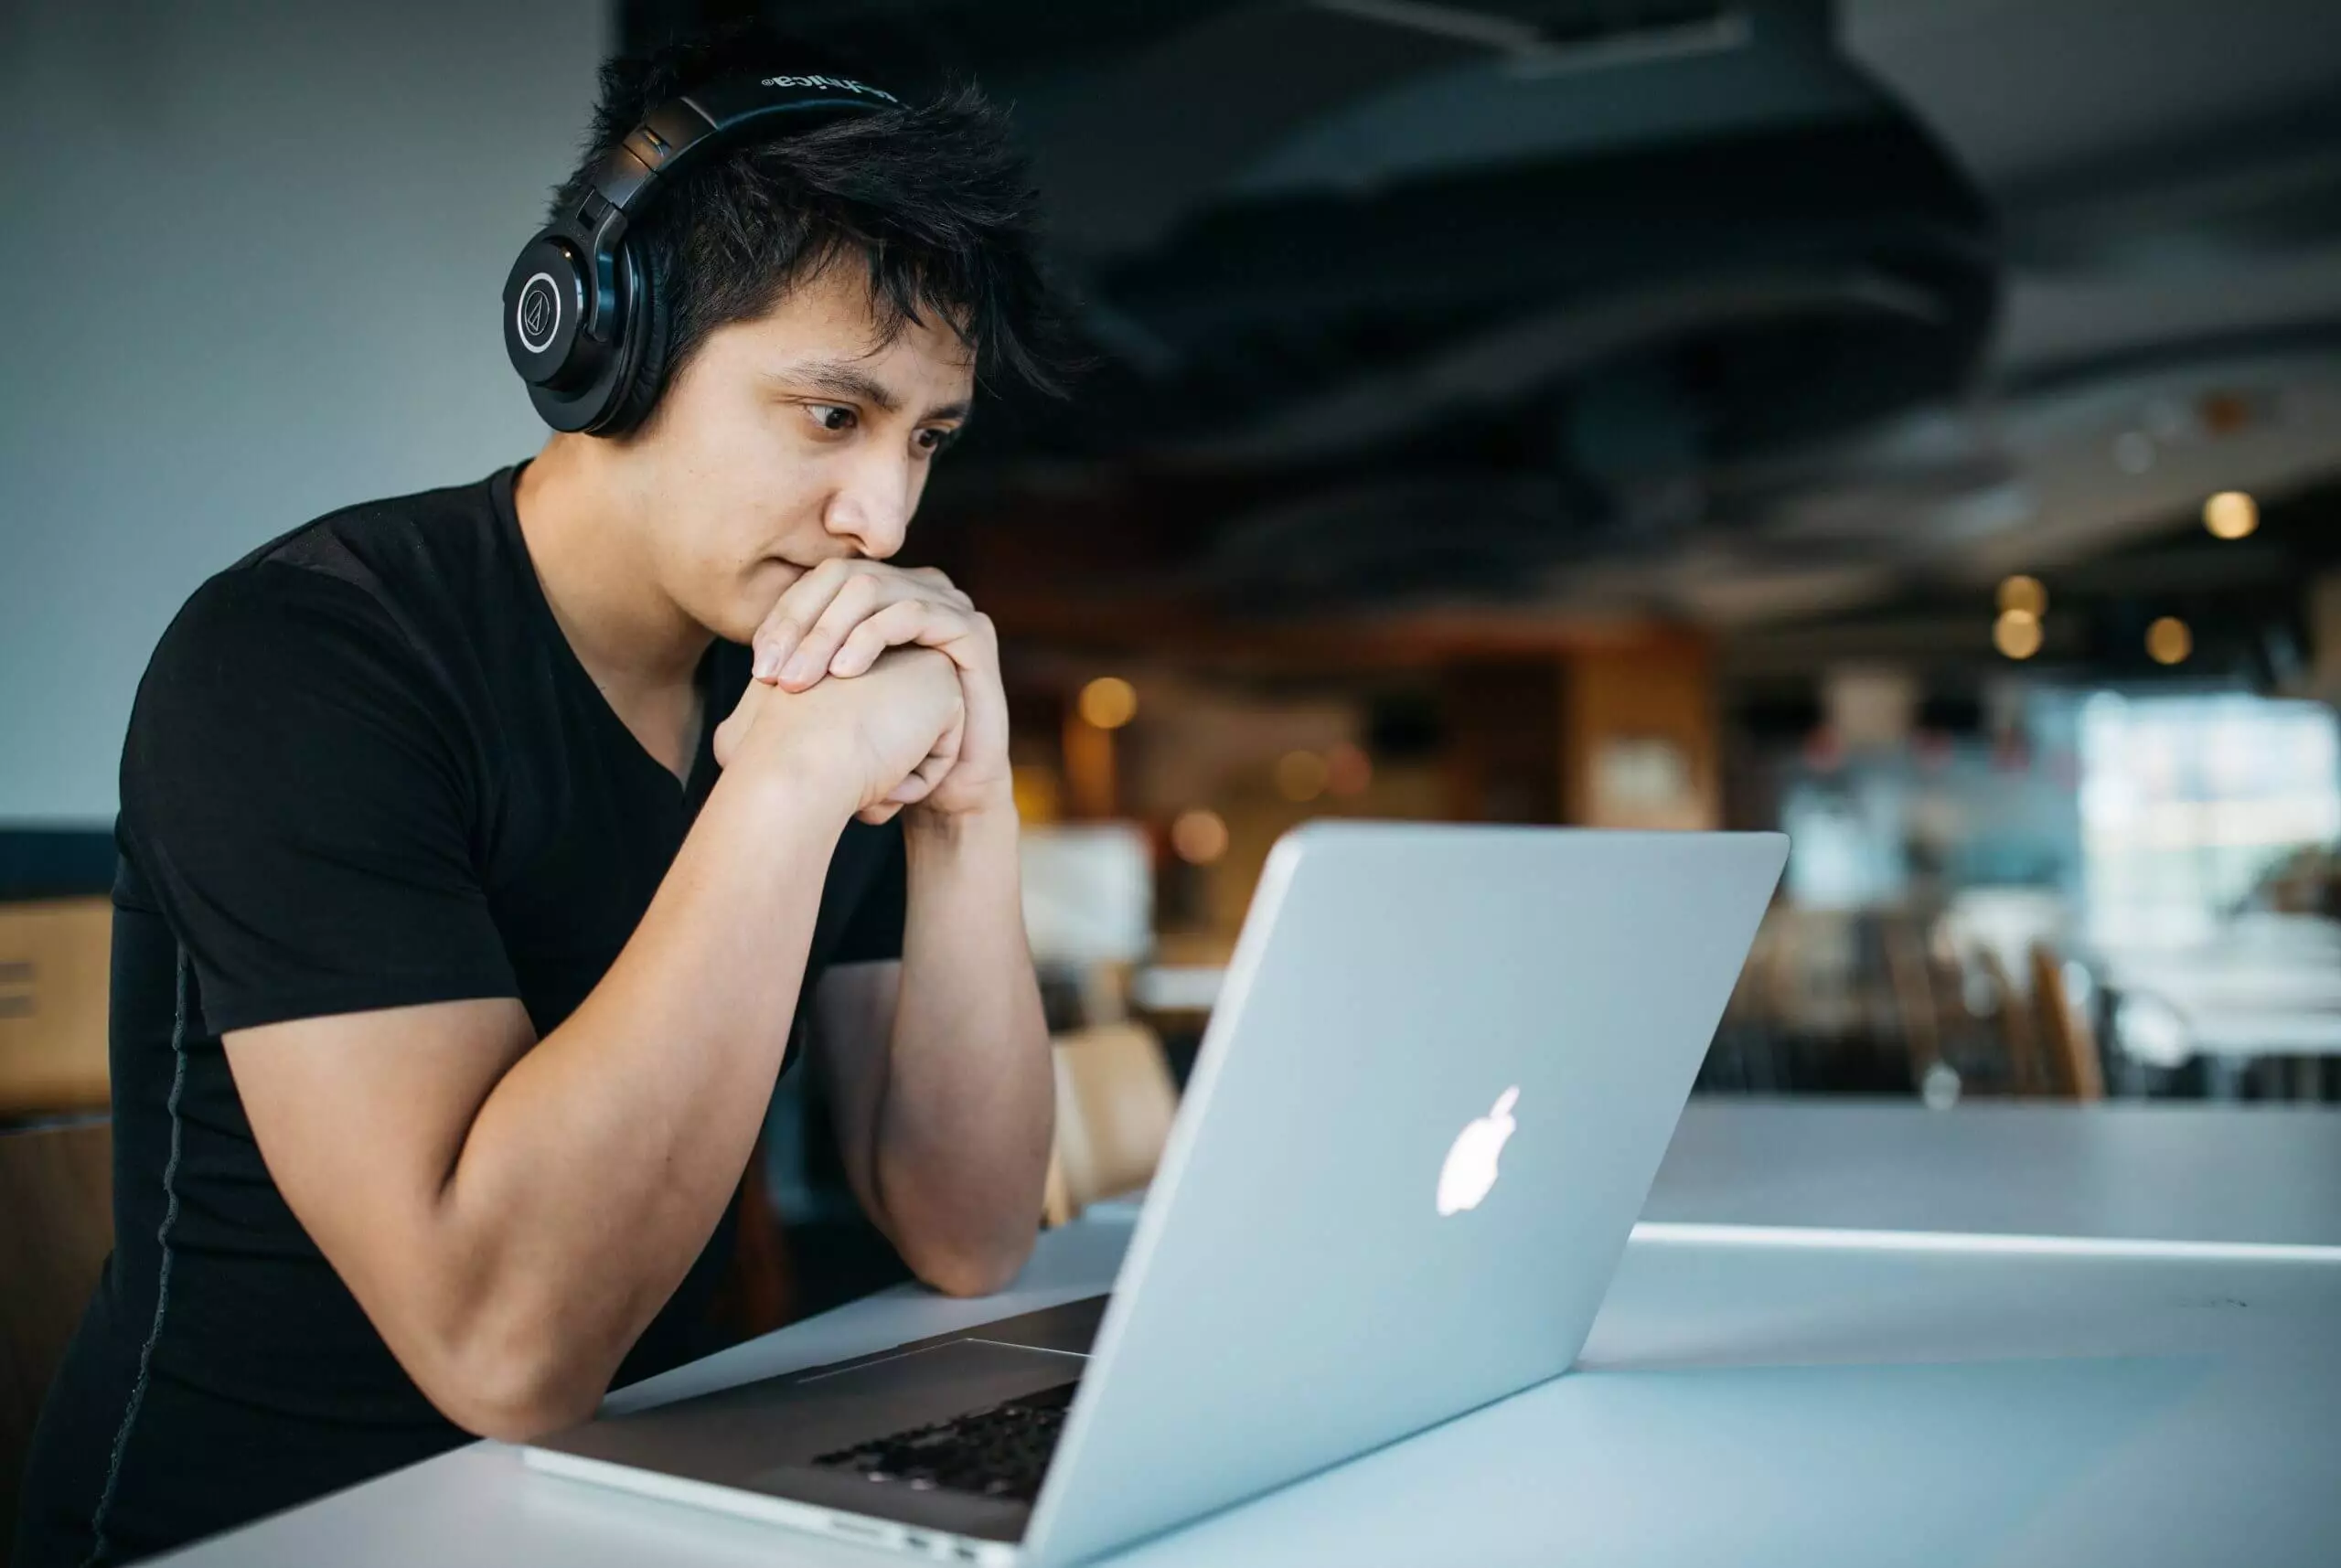 content marketing mistakes - man working on a laptop with headphones